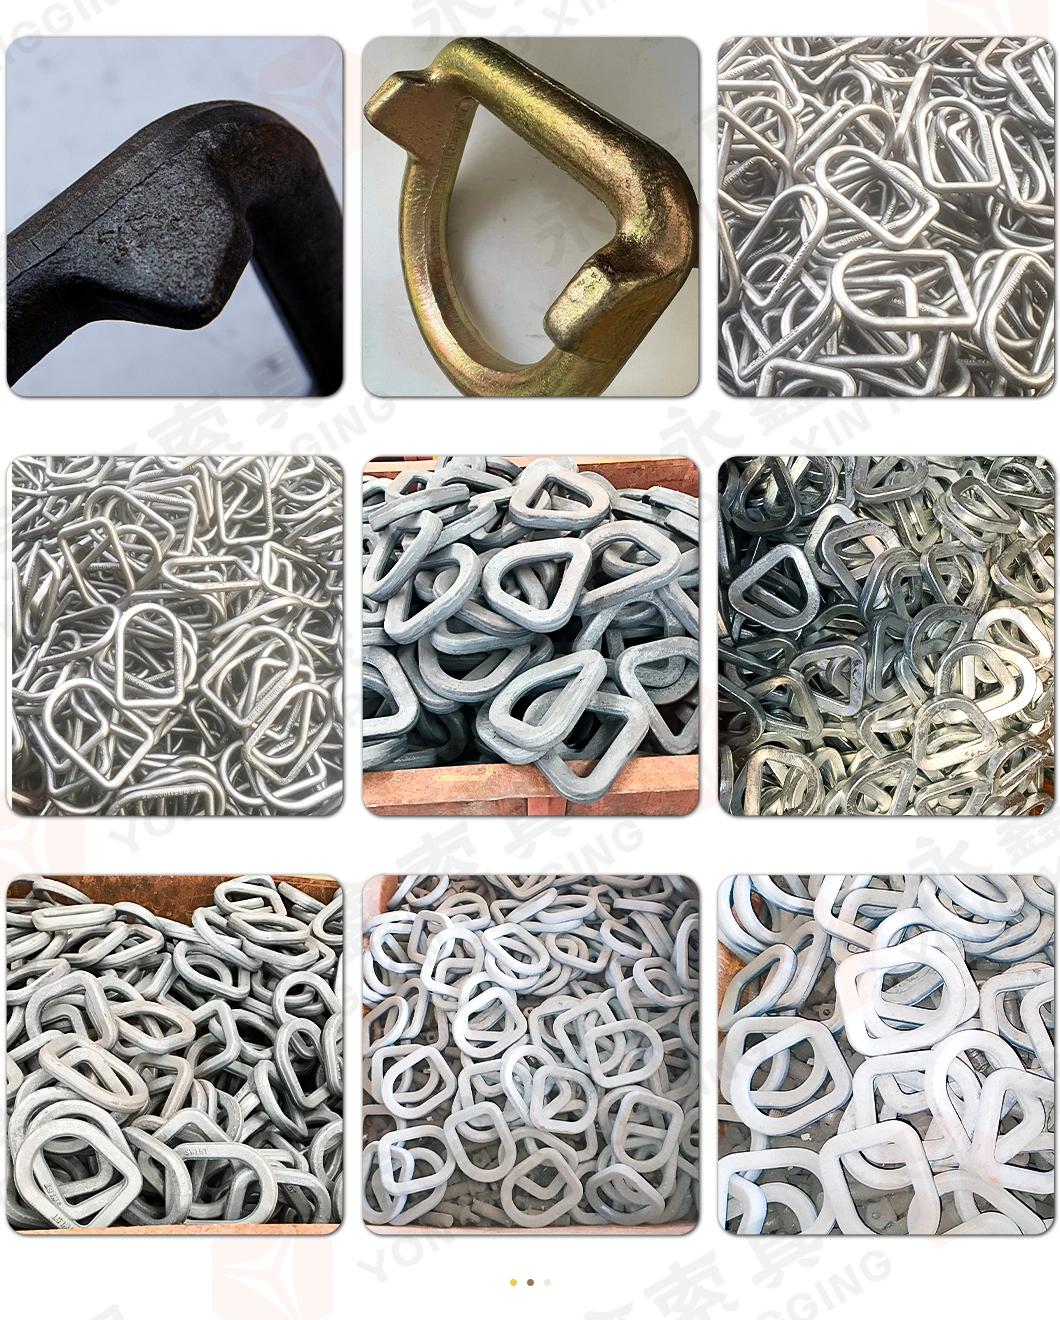 High Quality Forged Rigging D Ring with Supporting Point|Customized Forged Lashing D Ring